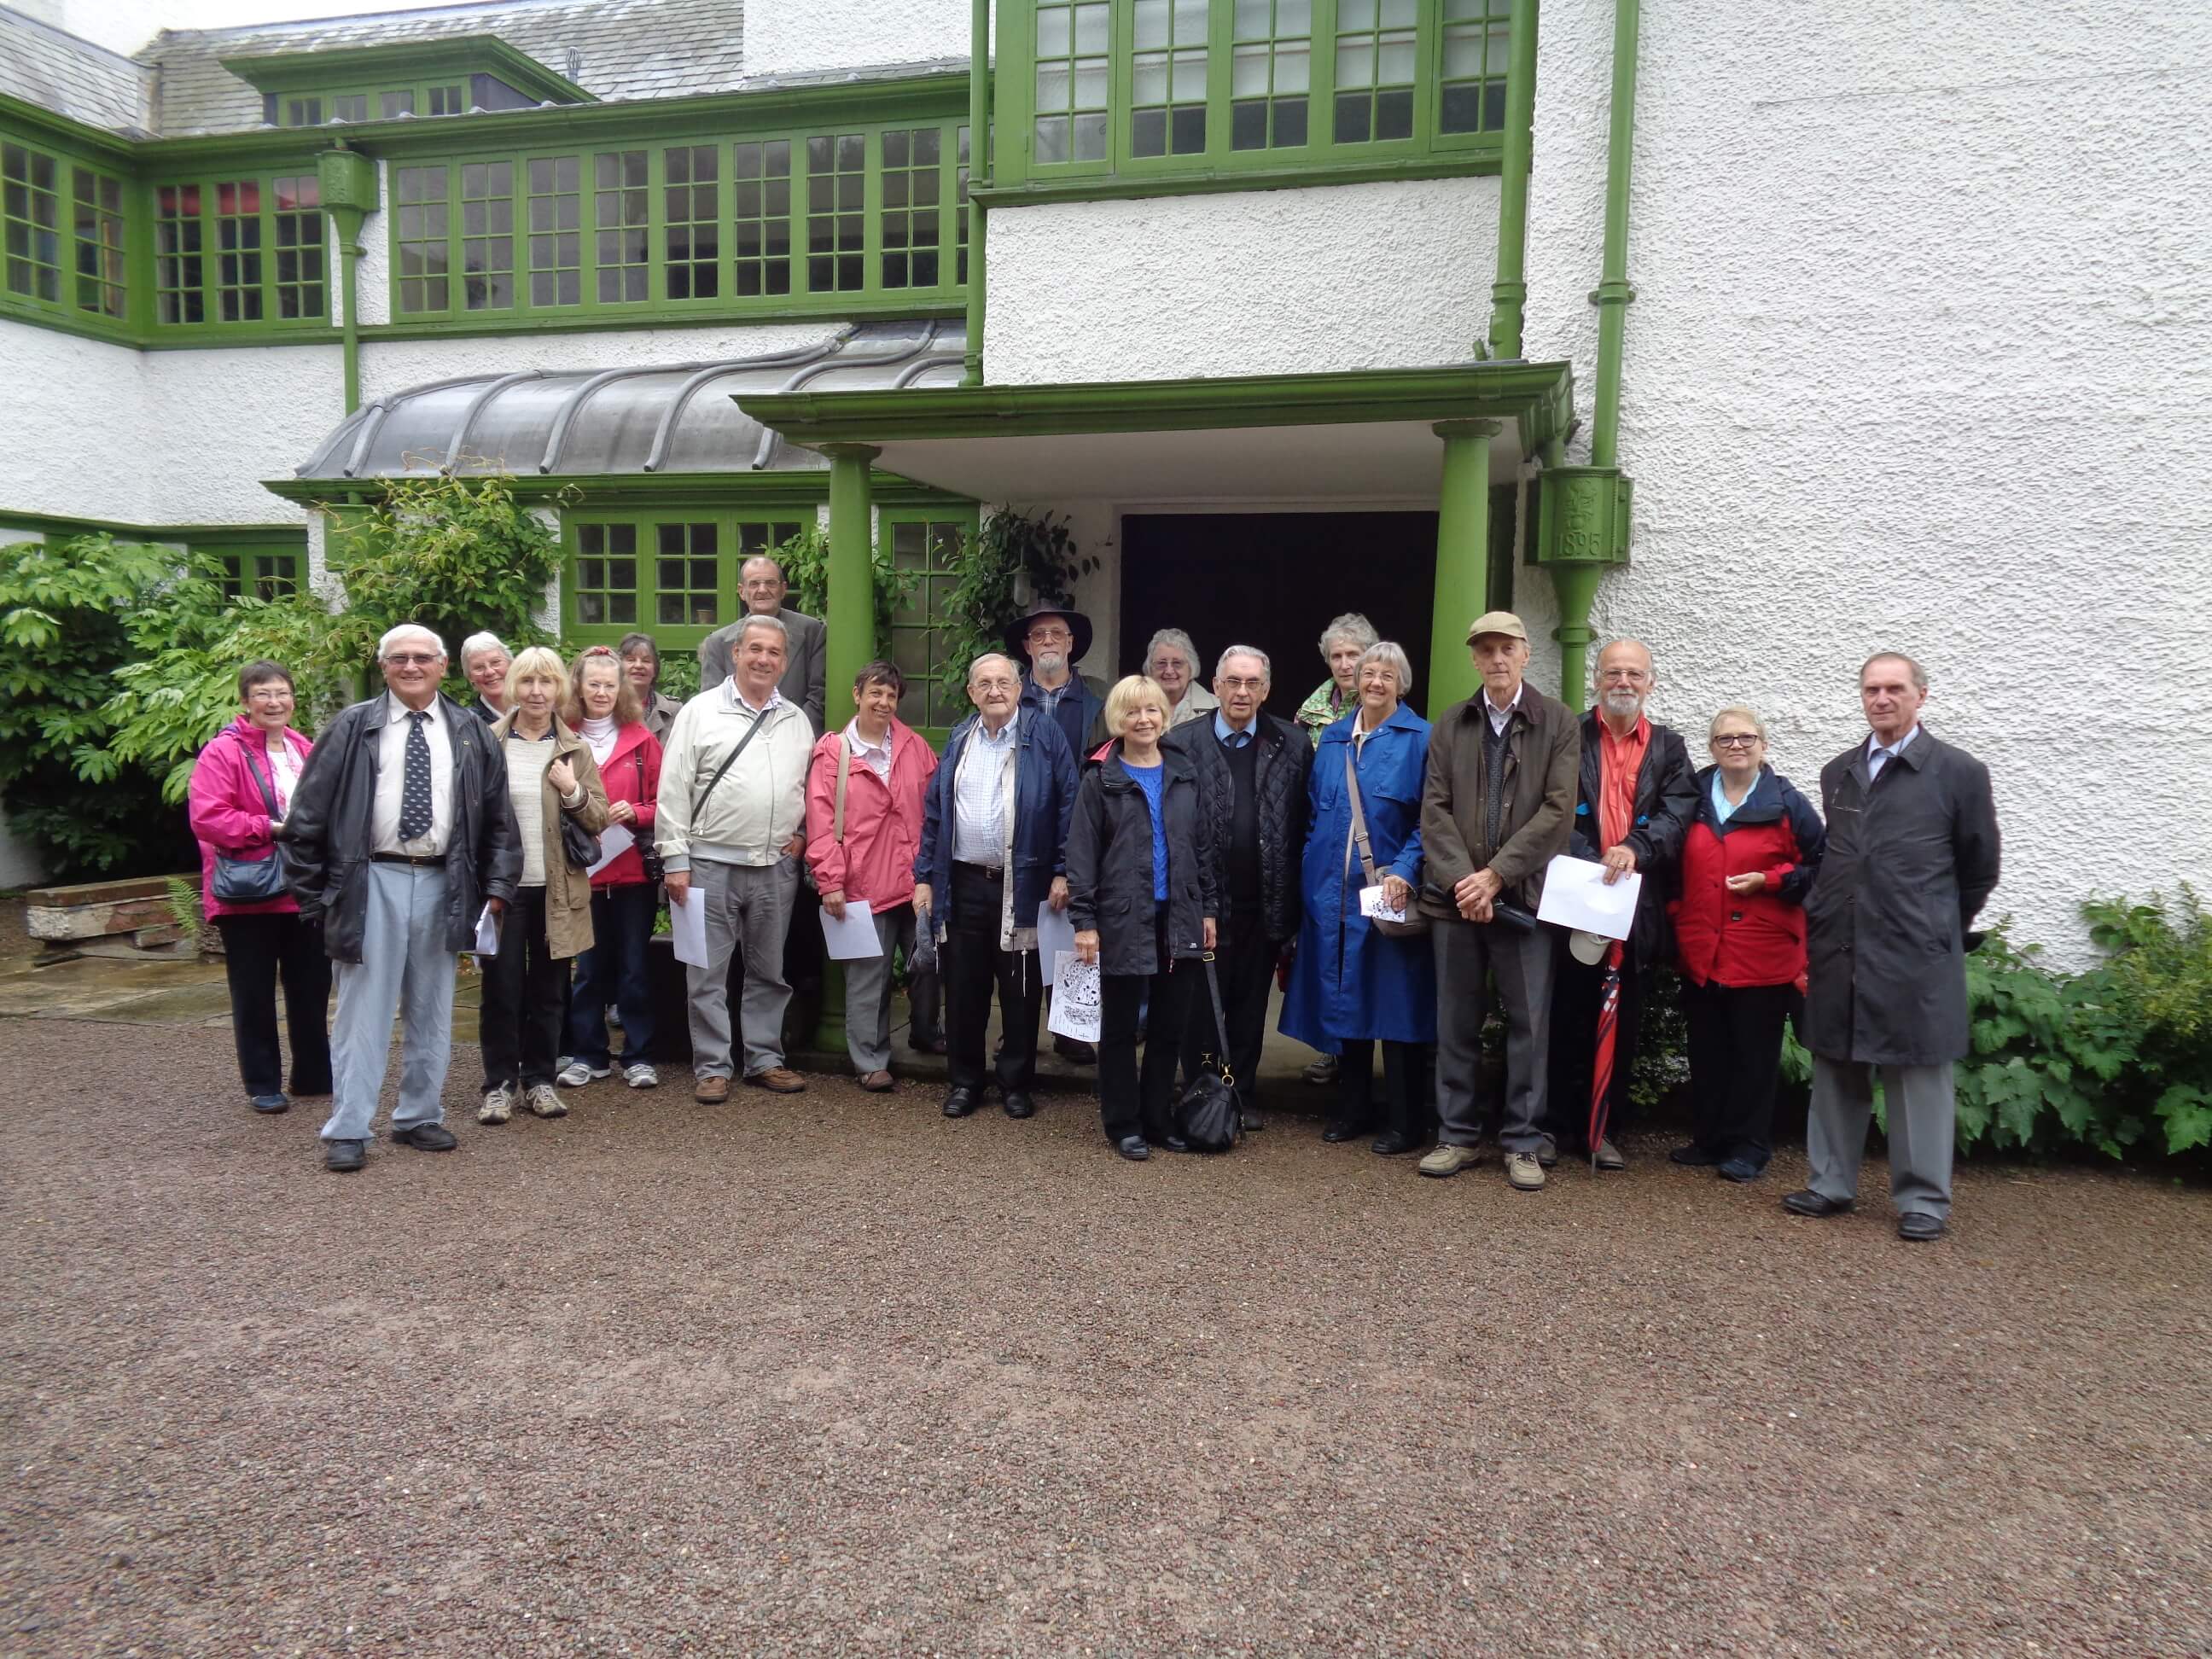 Society Outing to Perrycroft